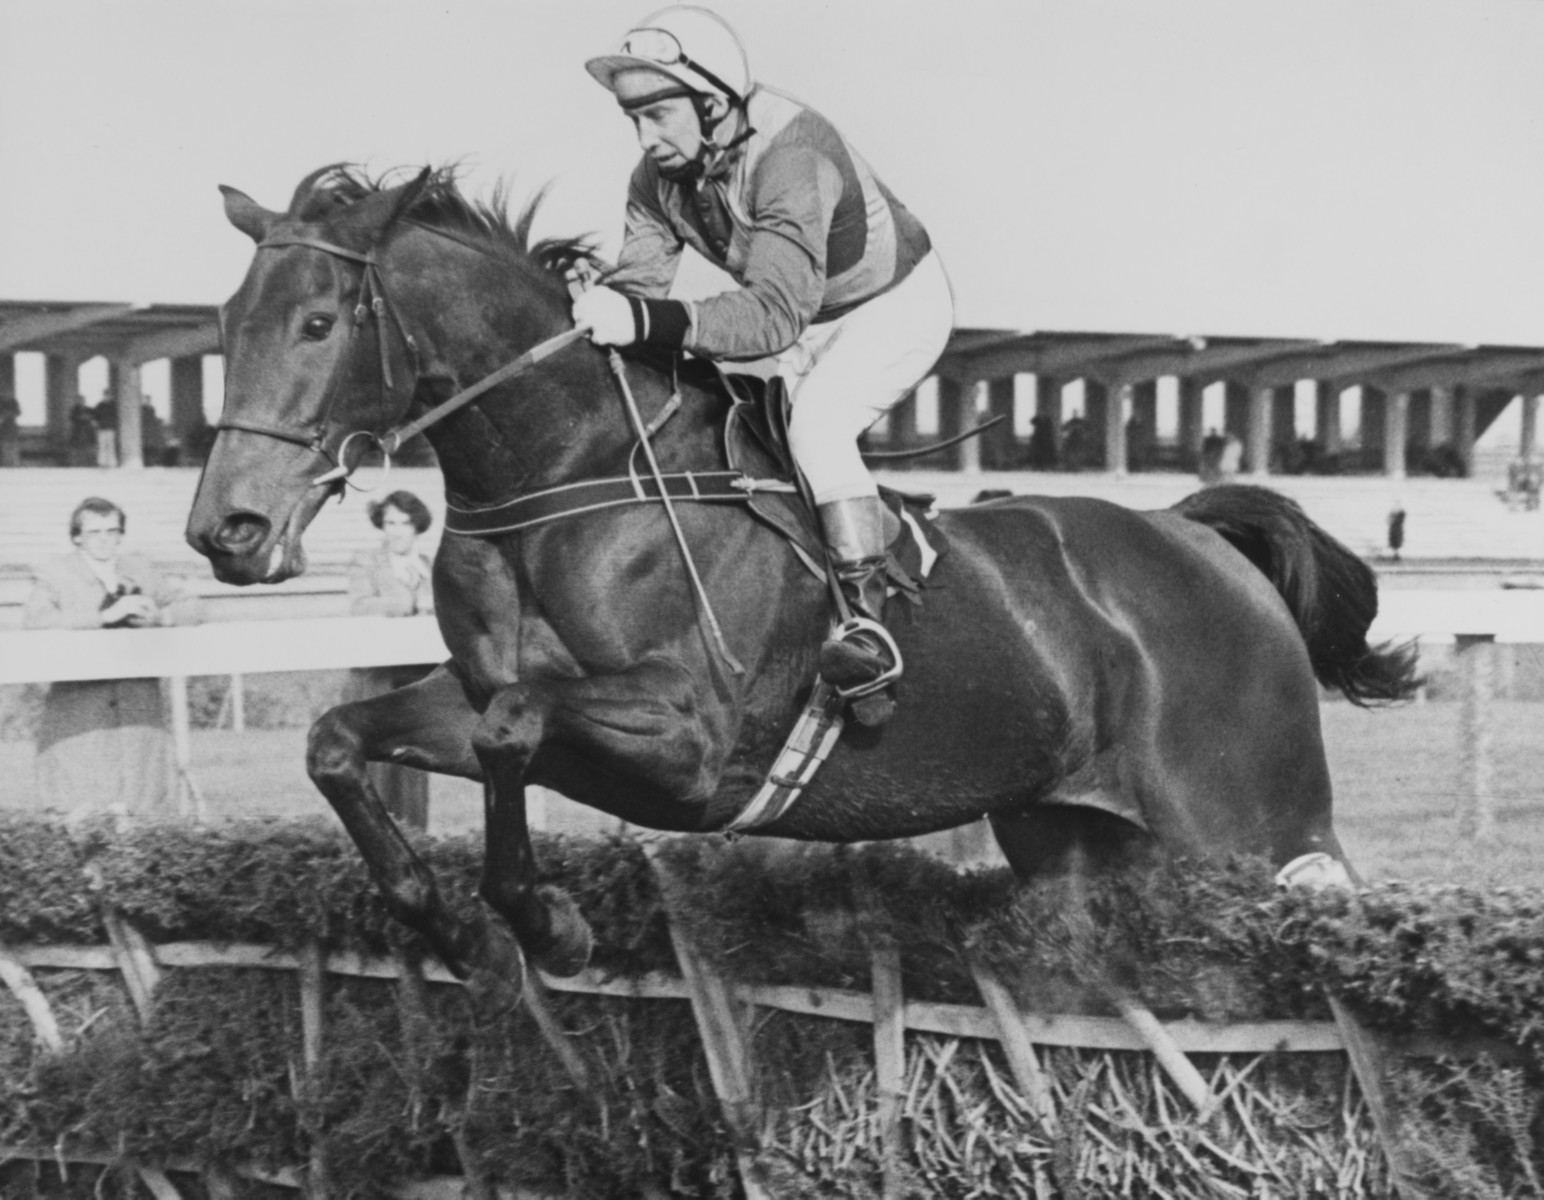 , Number 17: The legendary Festival hurdler that downed Sea Pigeon &amp; Monksfield in the best ever Champion Hurdle